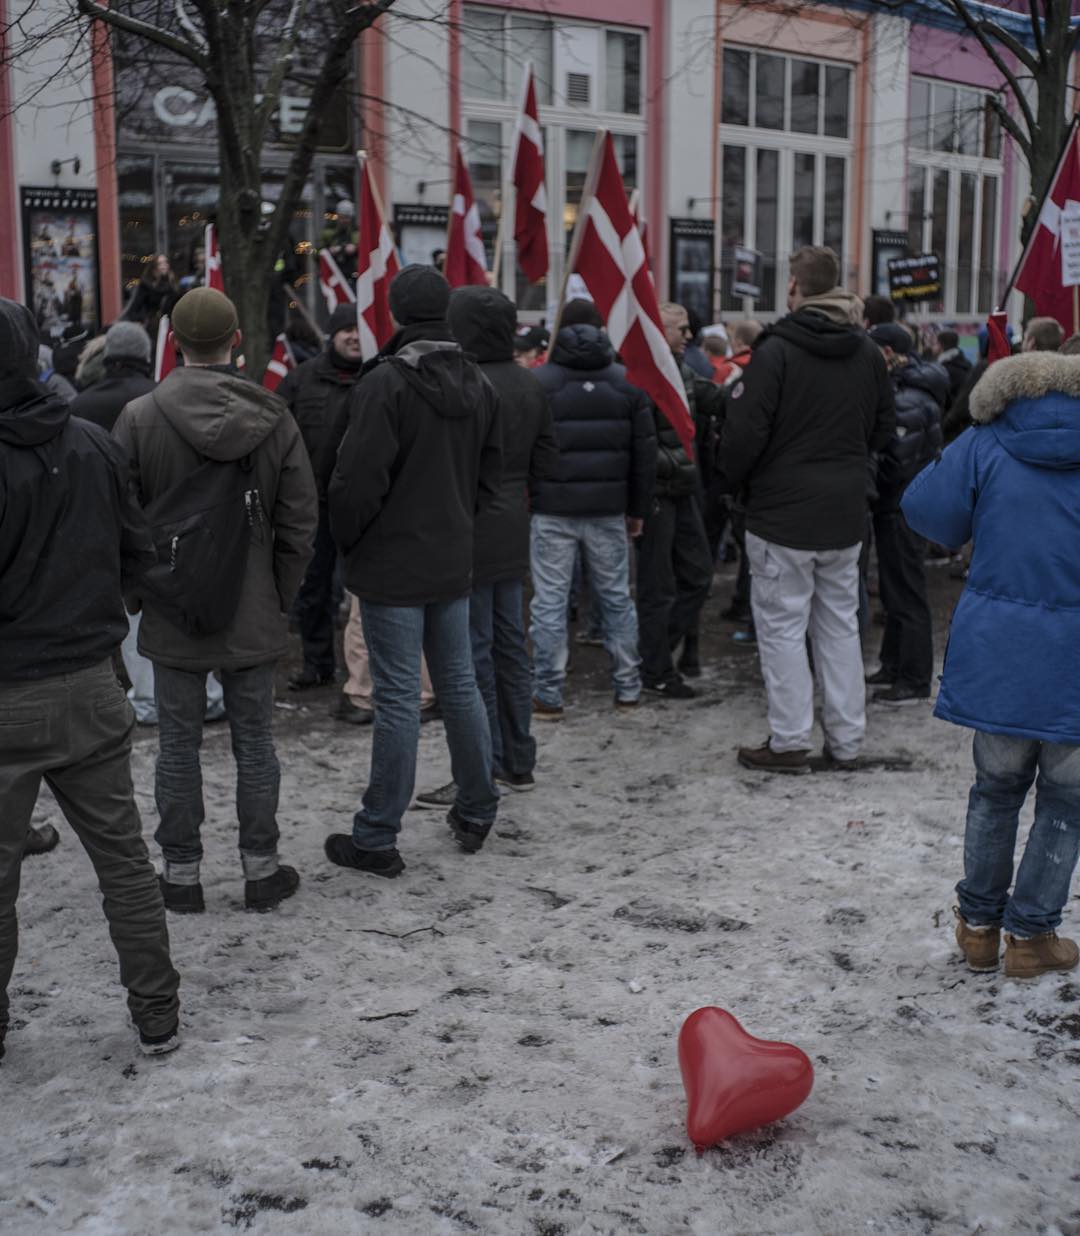 A heartshaped balloon at the Pegida demonstration in Copenhagen. The balloon was thrown in as a protest against The anti-islamic rally